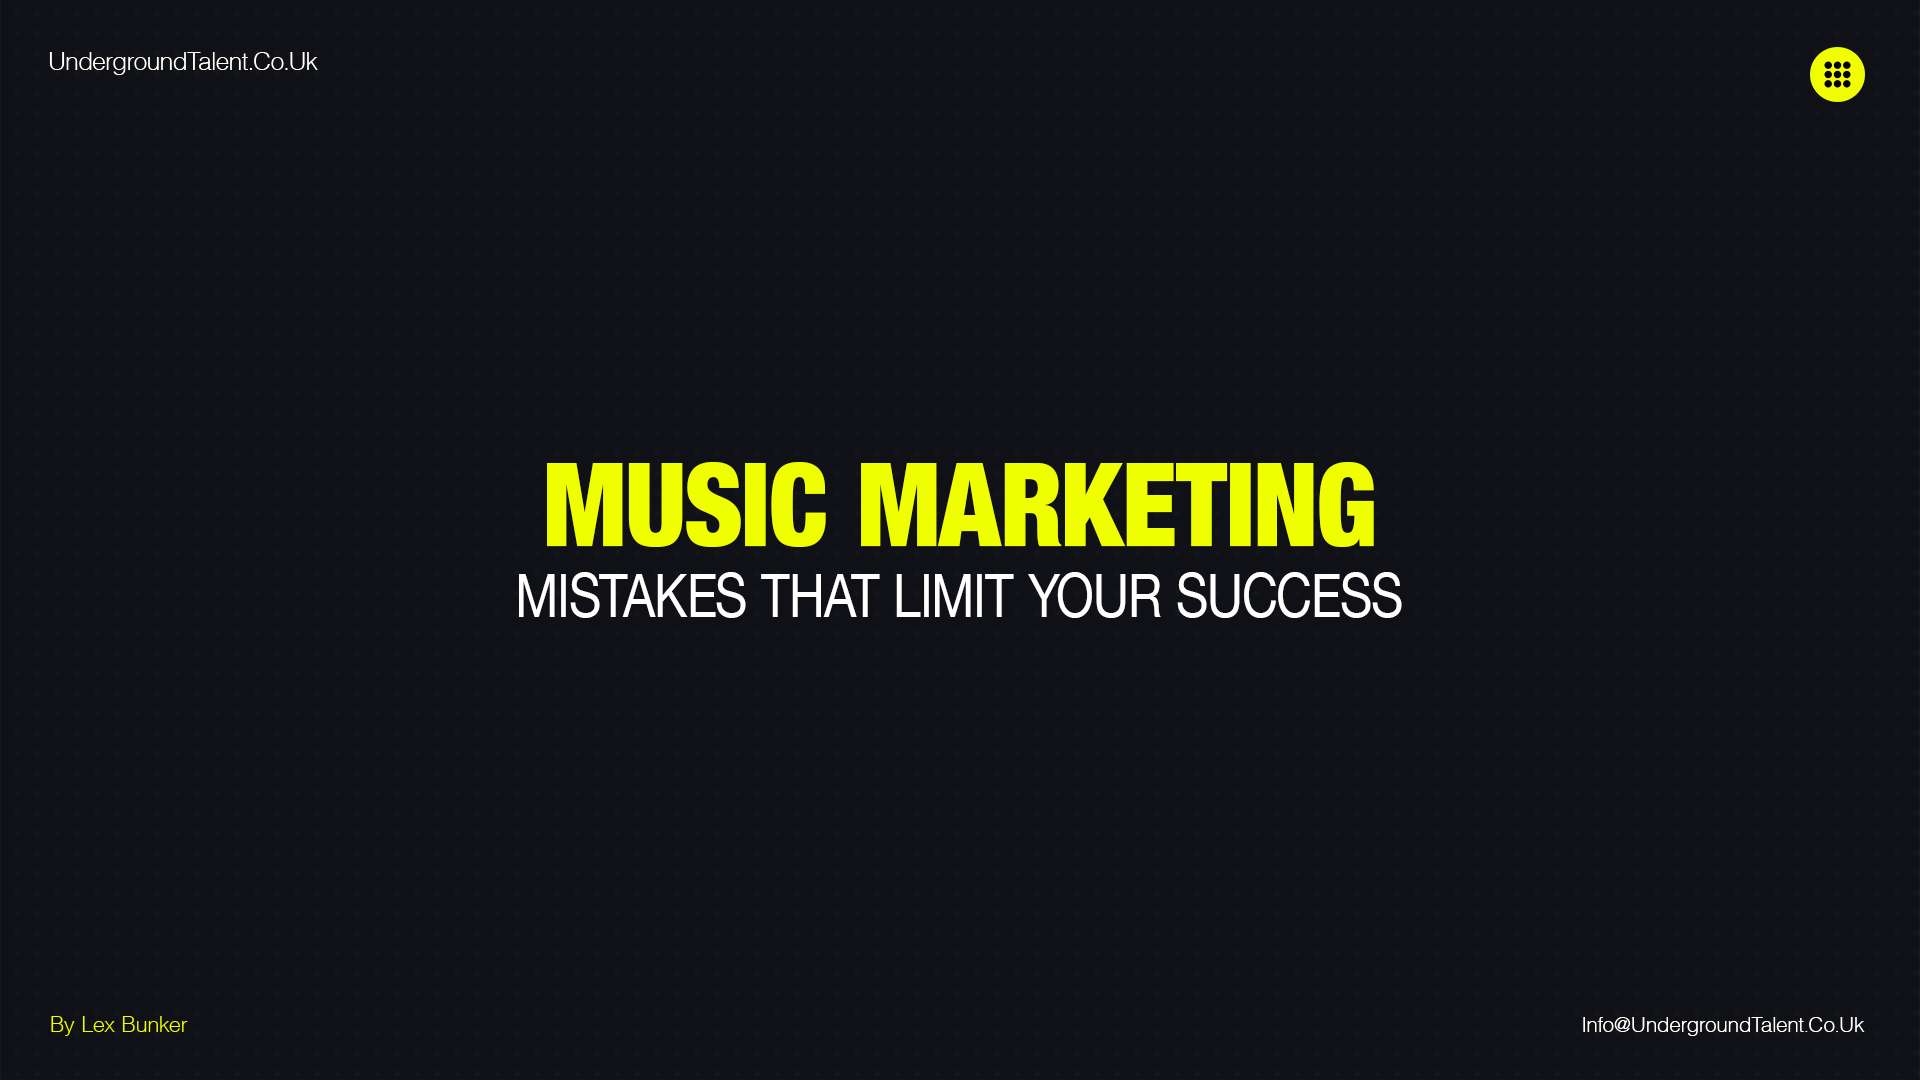 12 Music Marketing Mistakes That Limit Success